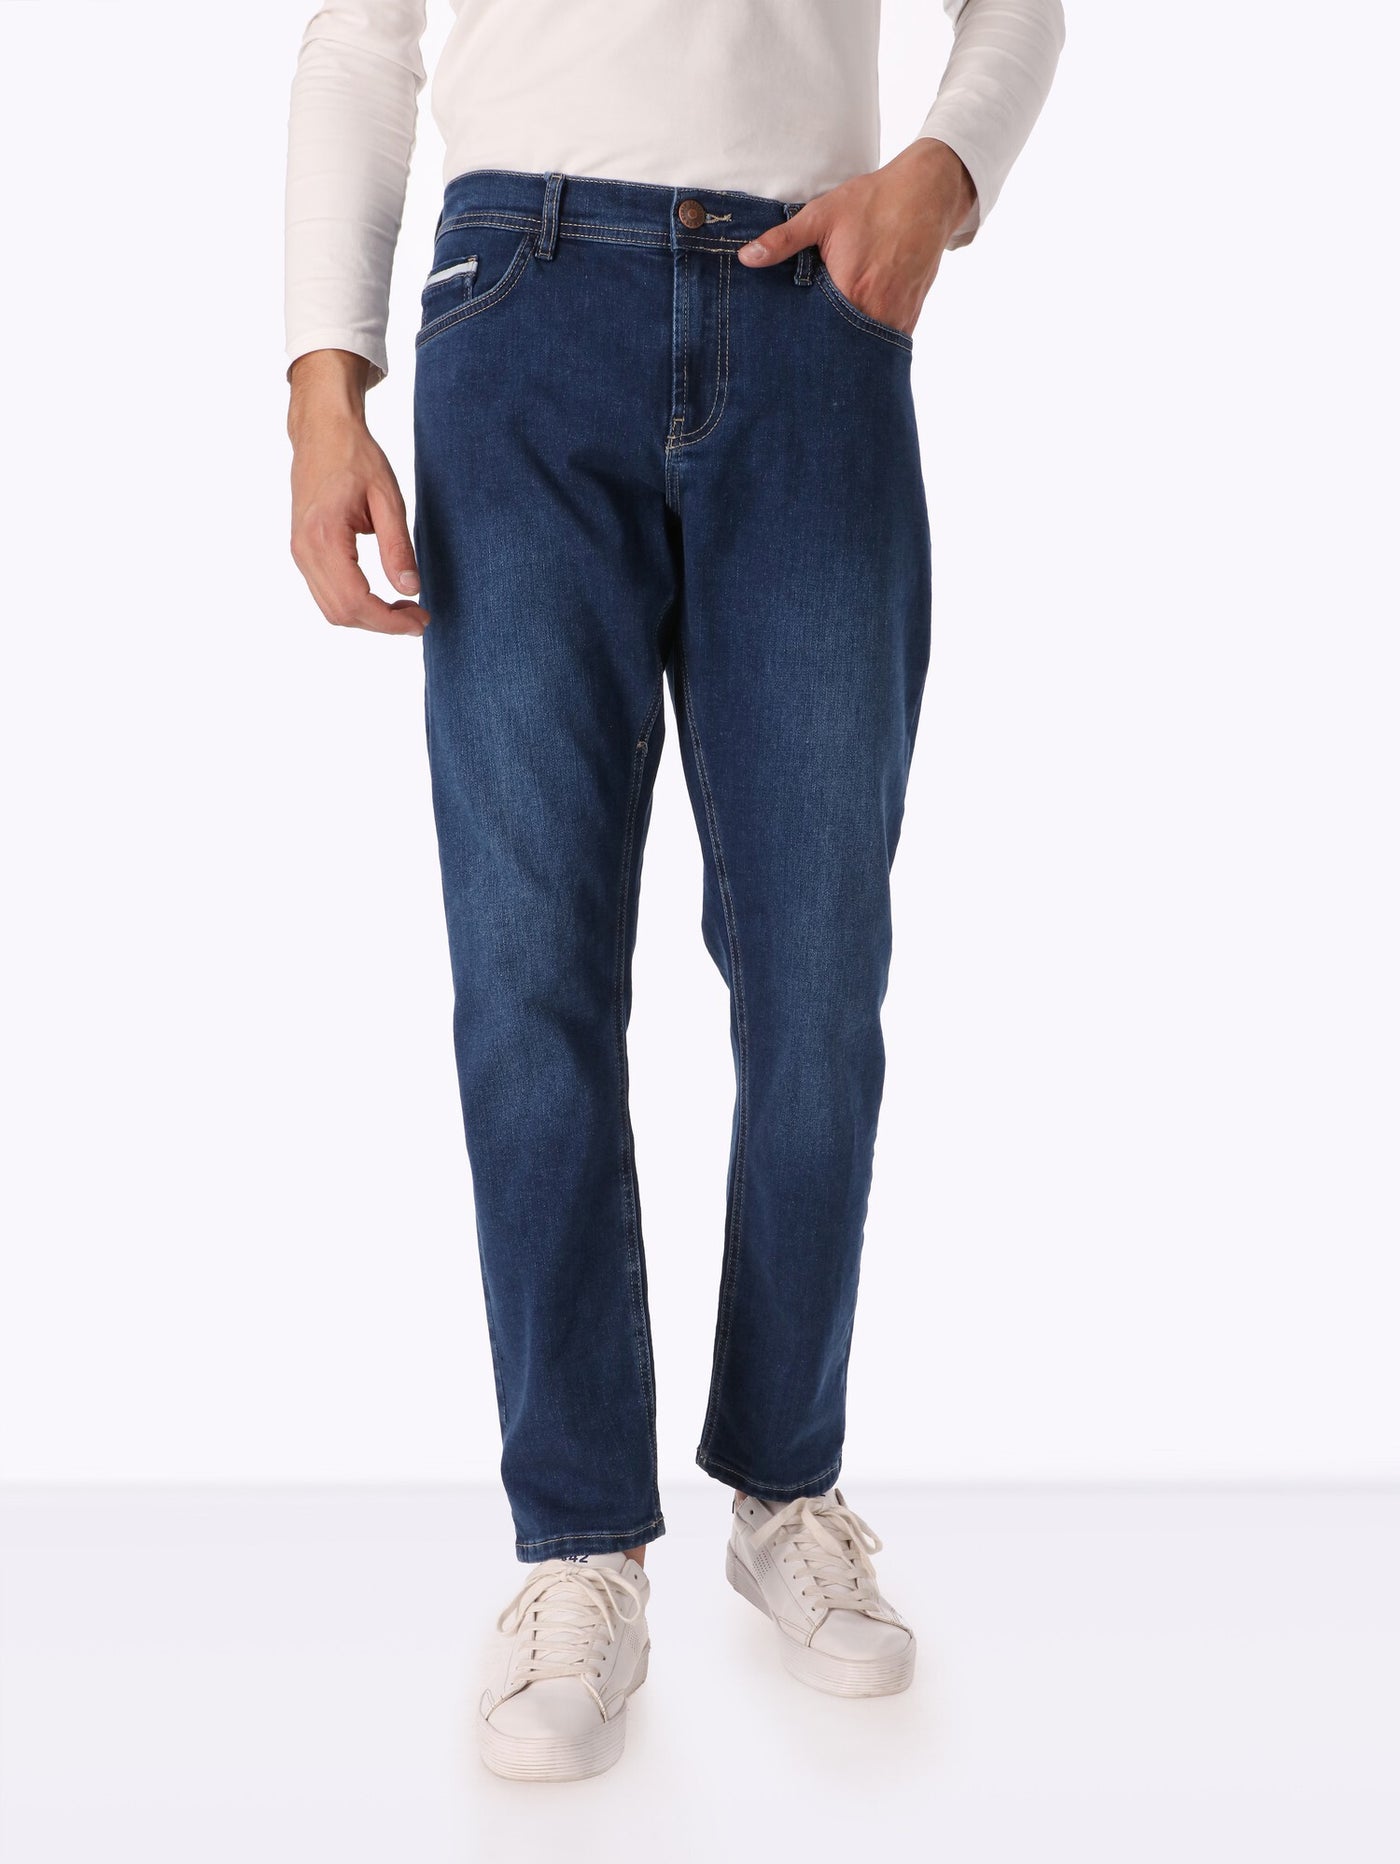 Jeans - Faded Effect - Regular Fit